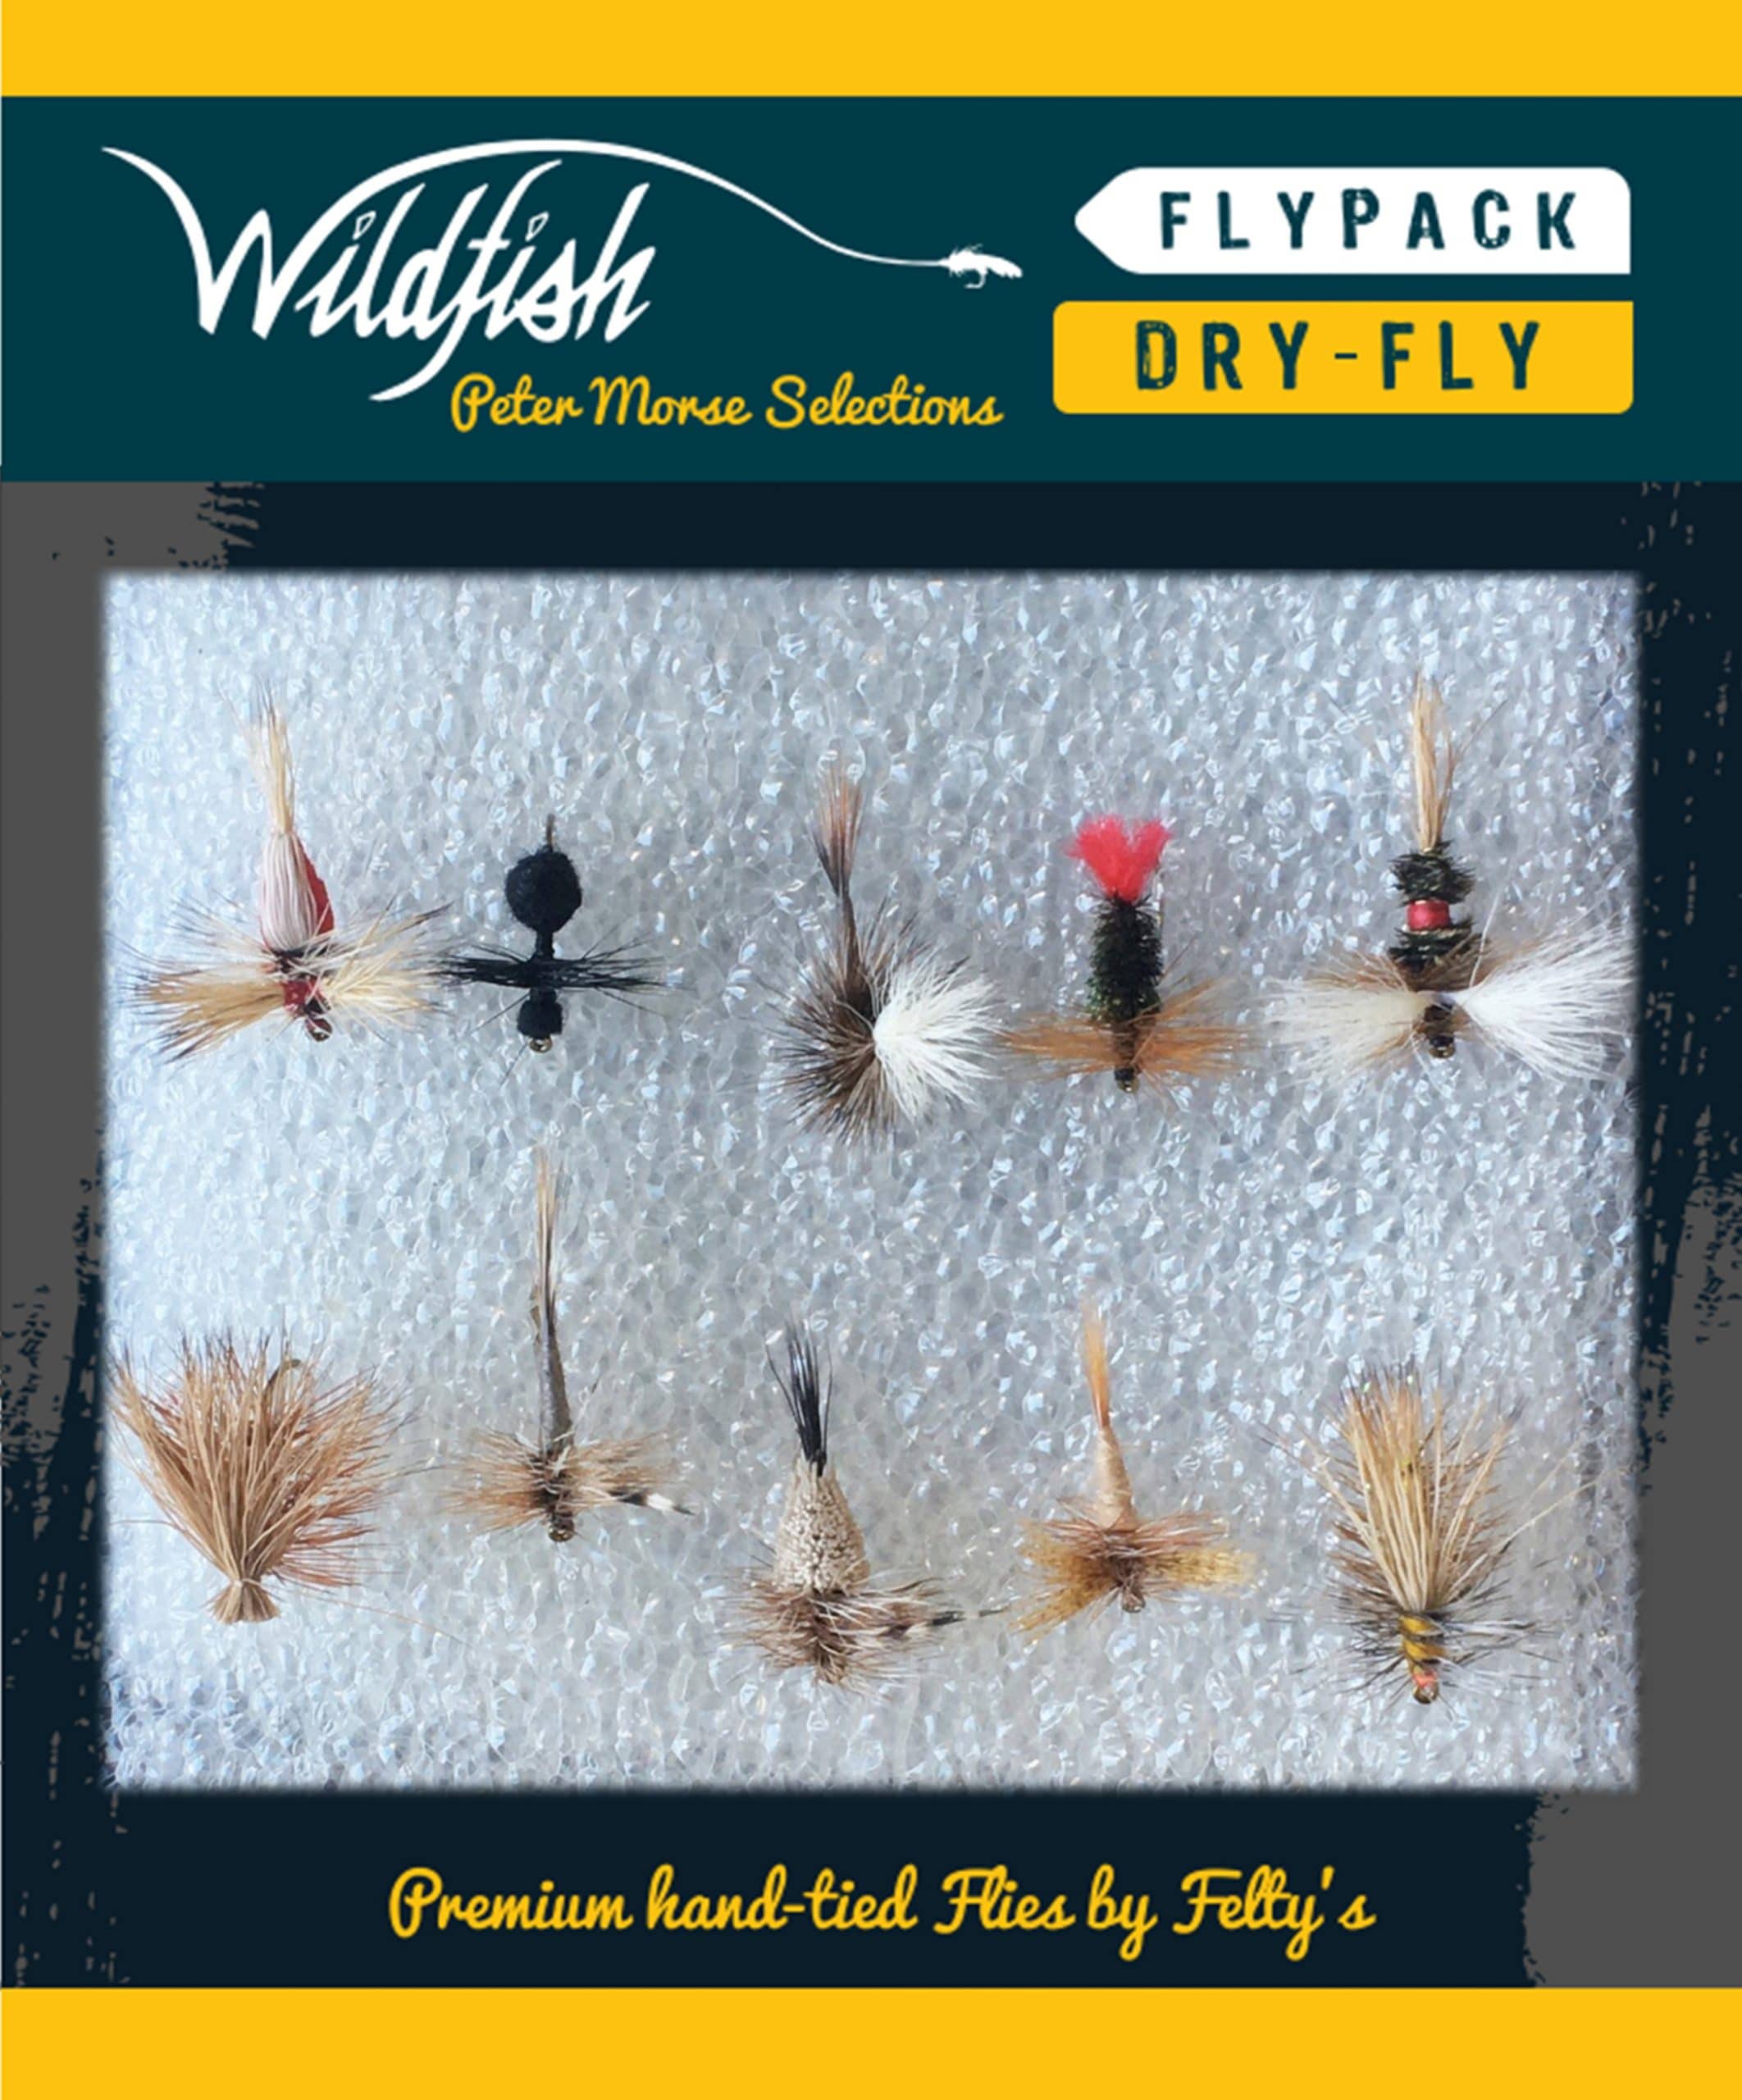 WILDFISH DRY FLY PACK - JM Gillies